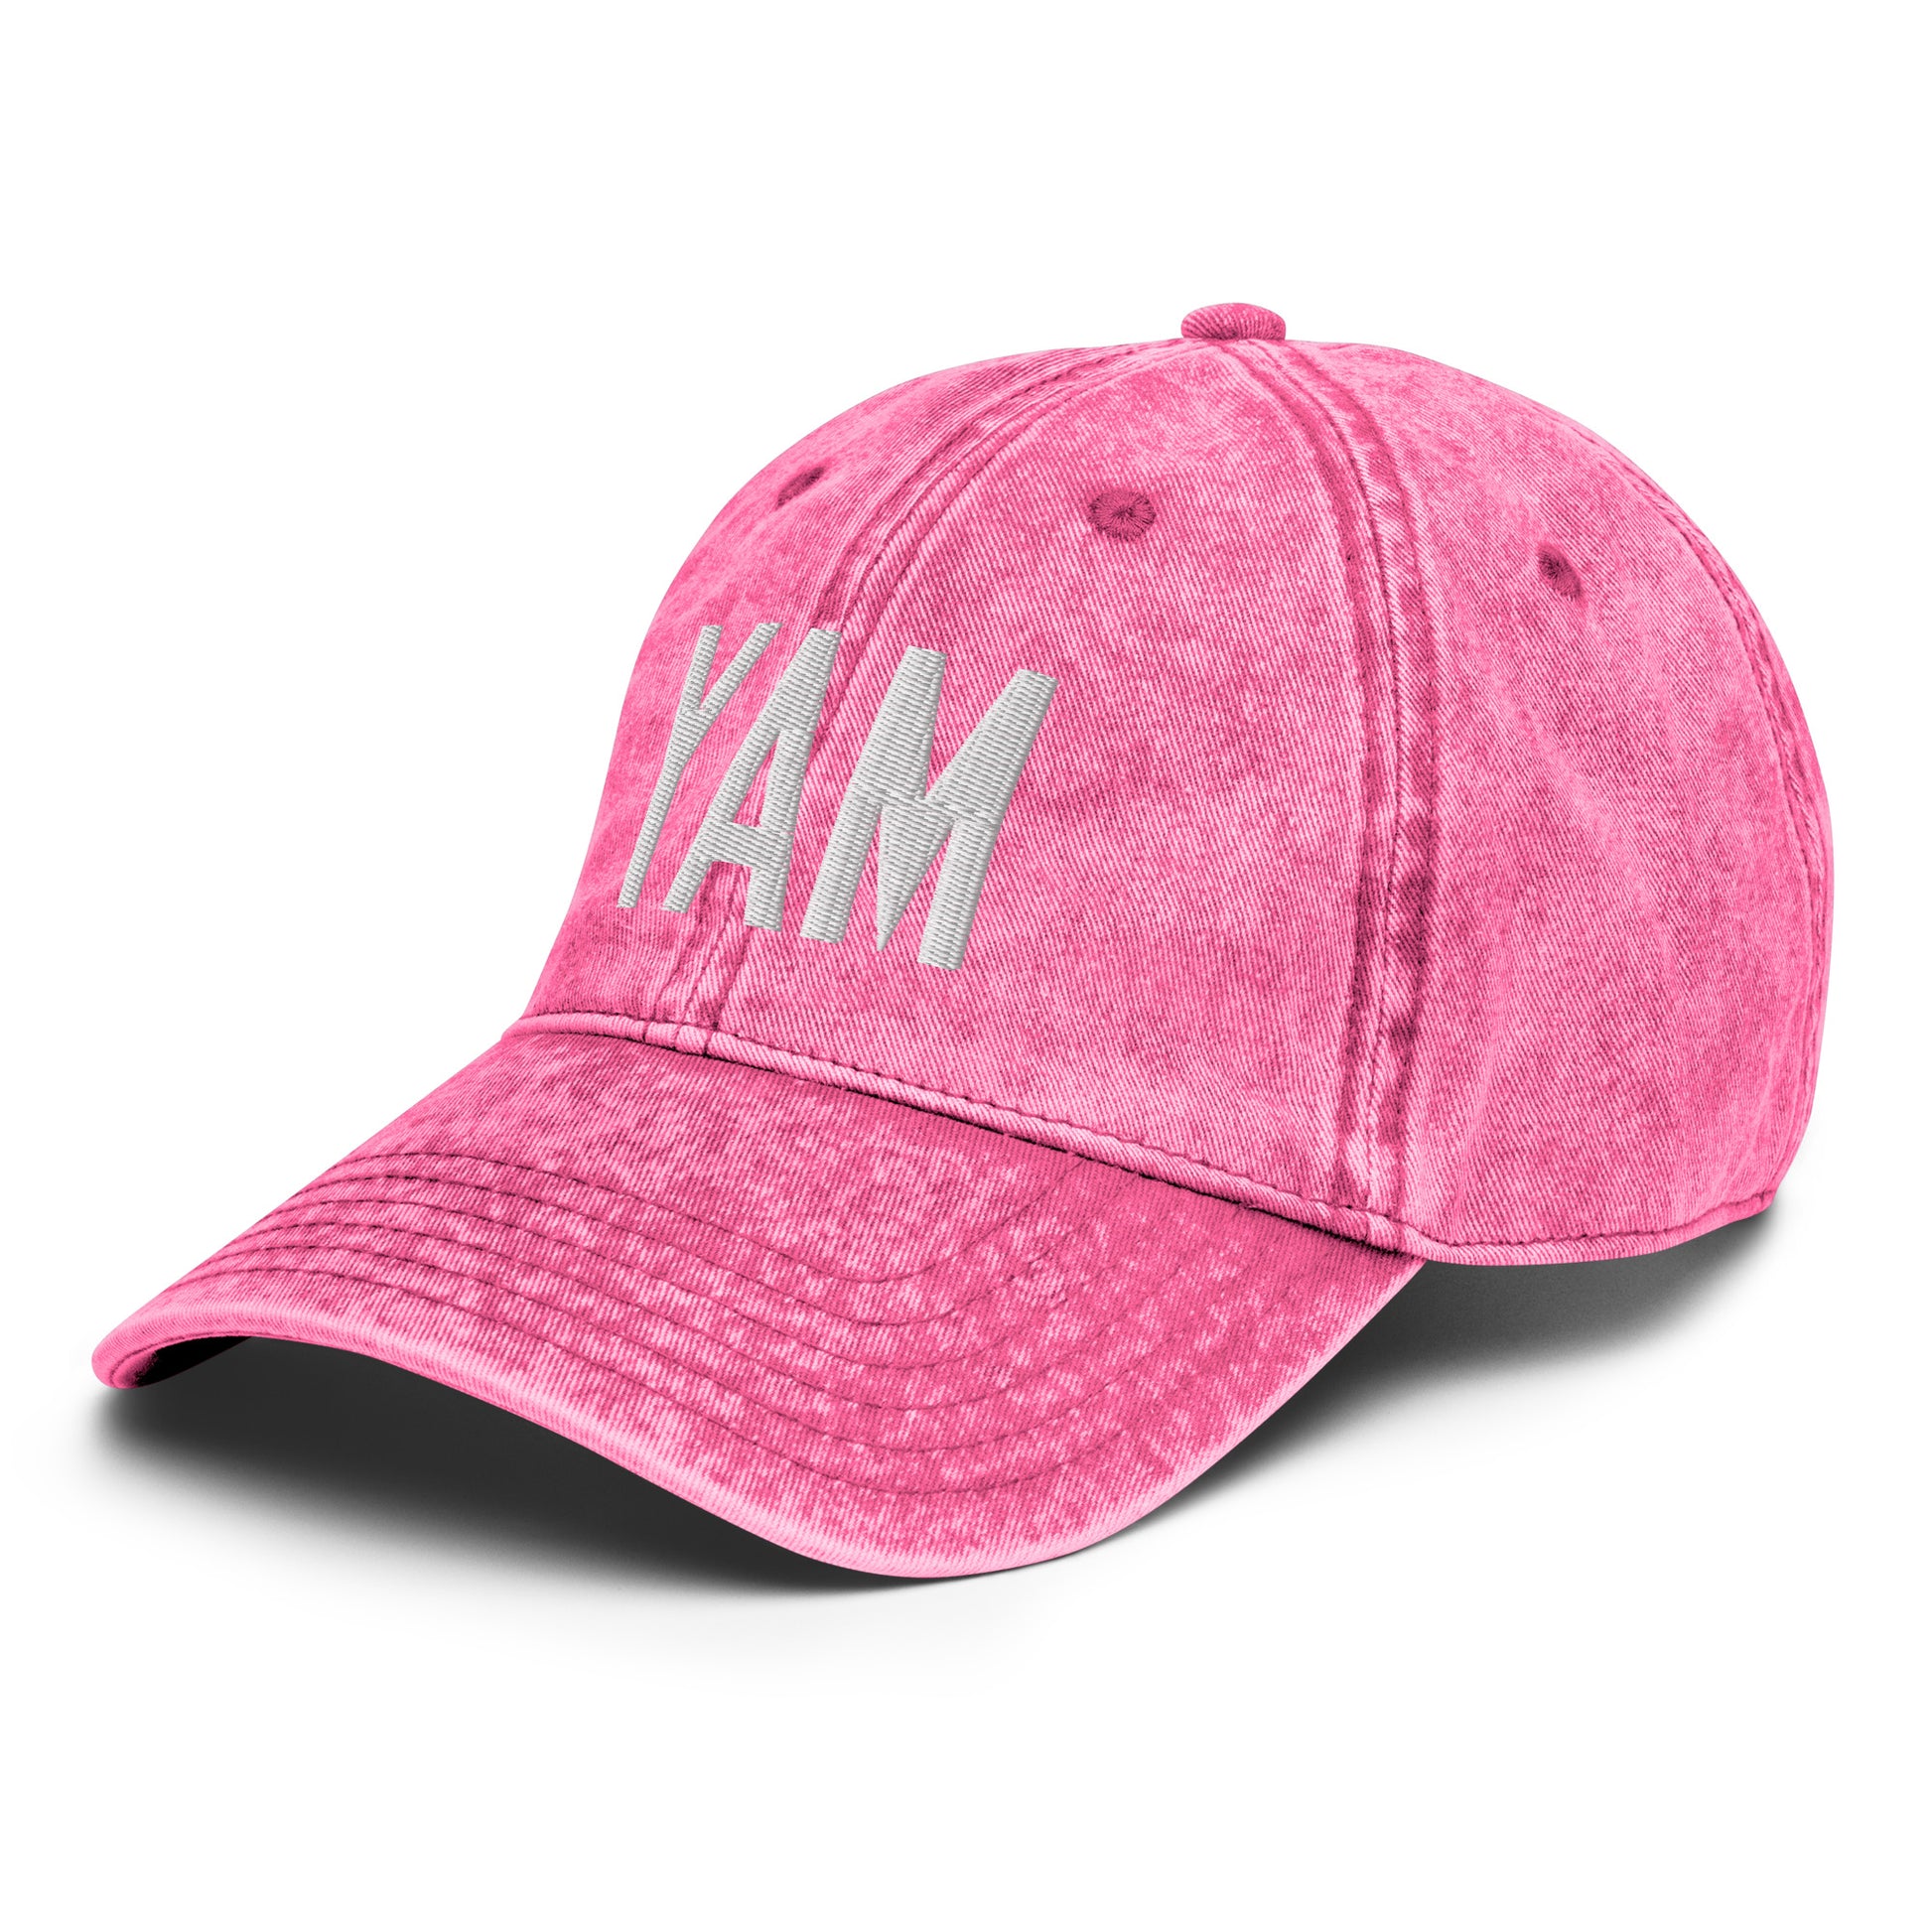 Airport Code Twill Cap - White • YAM Sault-Ste-Marie • YHM Designs - Image 26